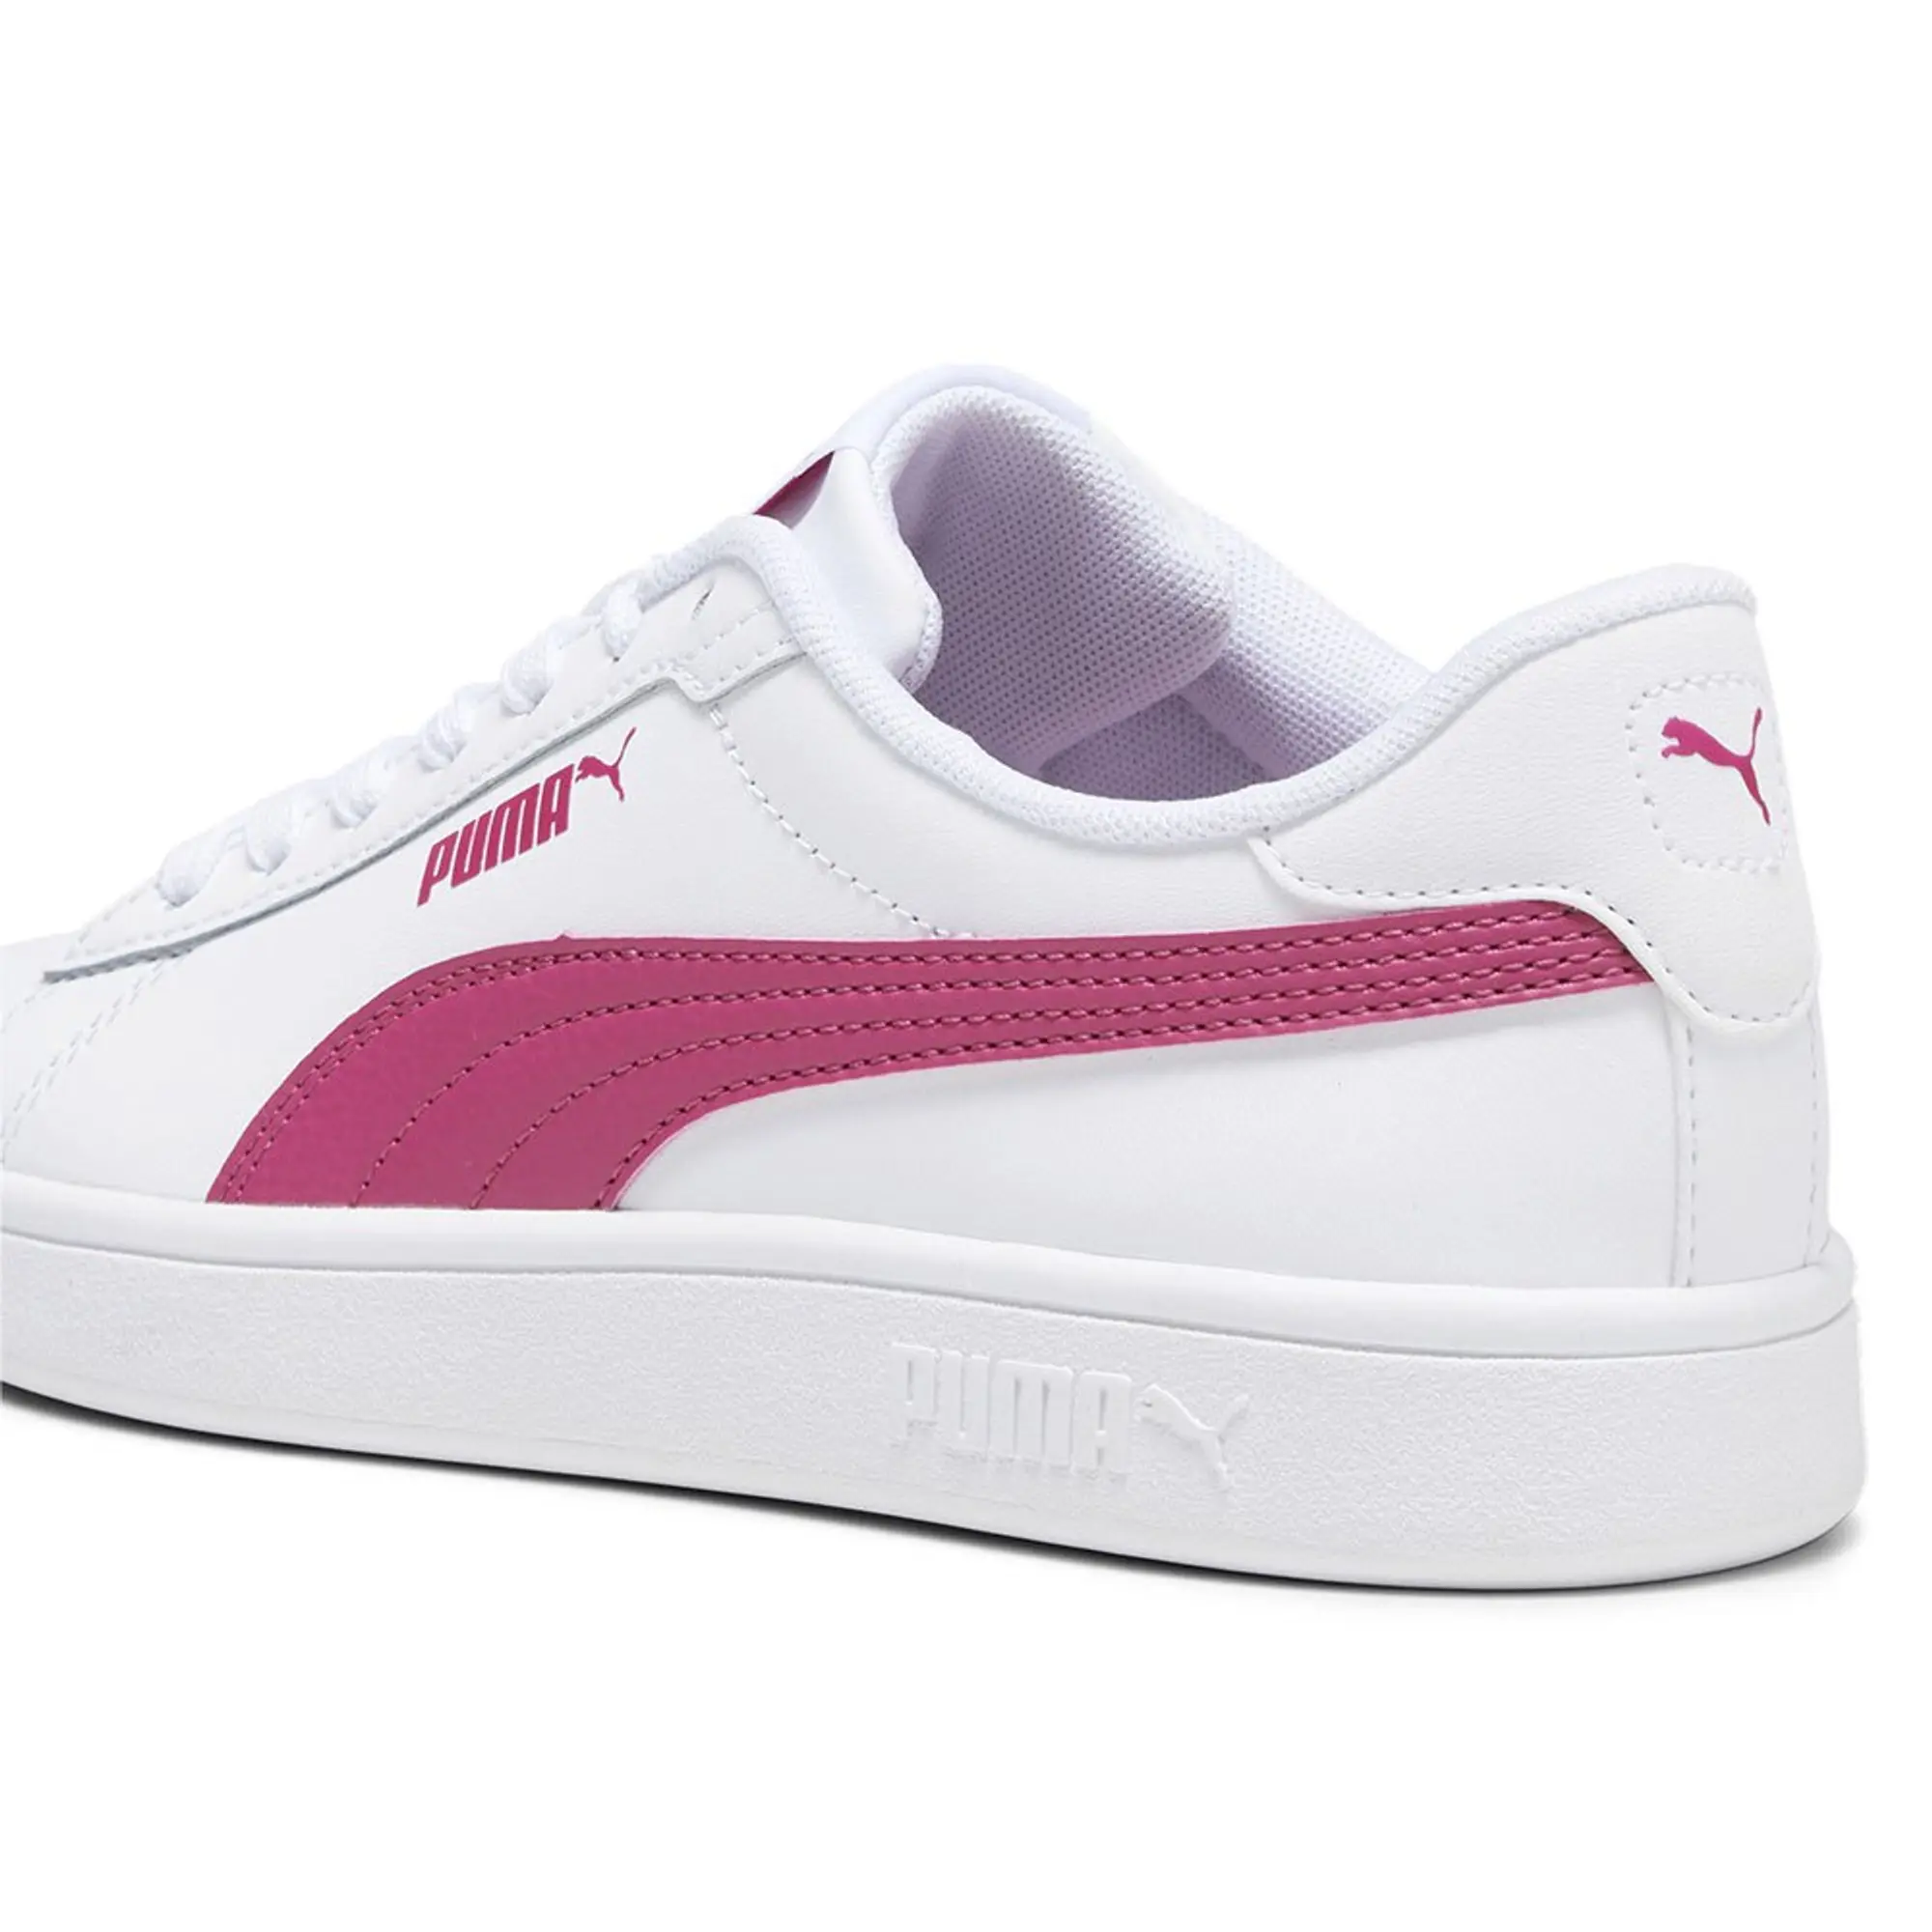 PUMA Smash Youth, Sneakers | White/Pinktastic Leather 392031_10 3.0